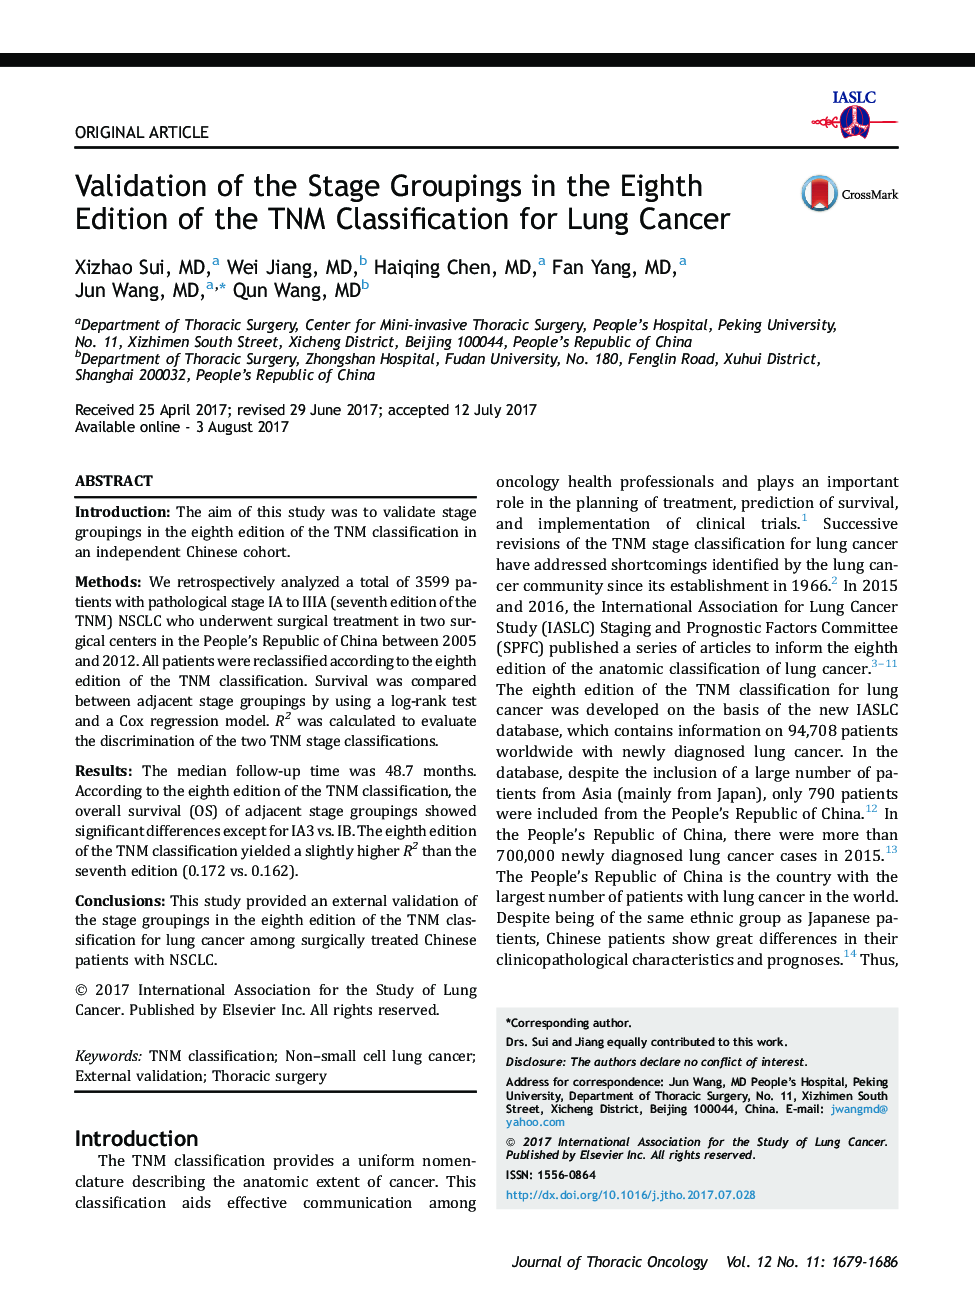 Validation of the Stage Groupings in the Eighth Edition of the TNM Classification for Lung Cancer